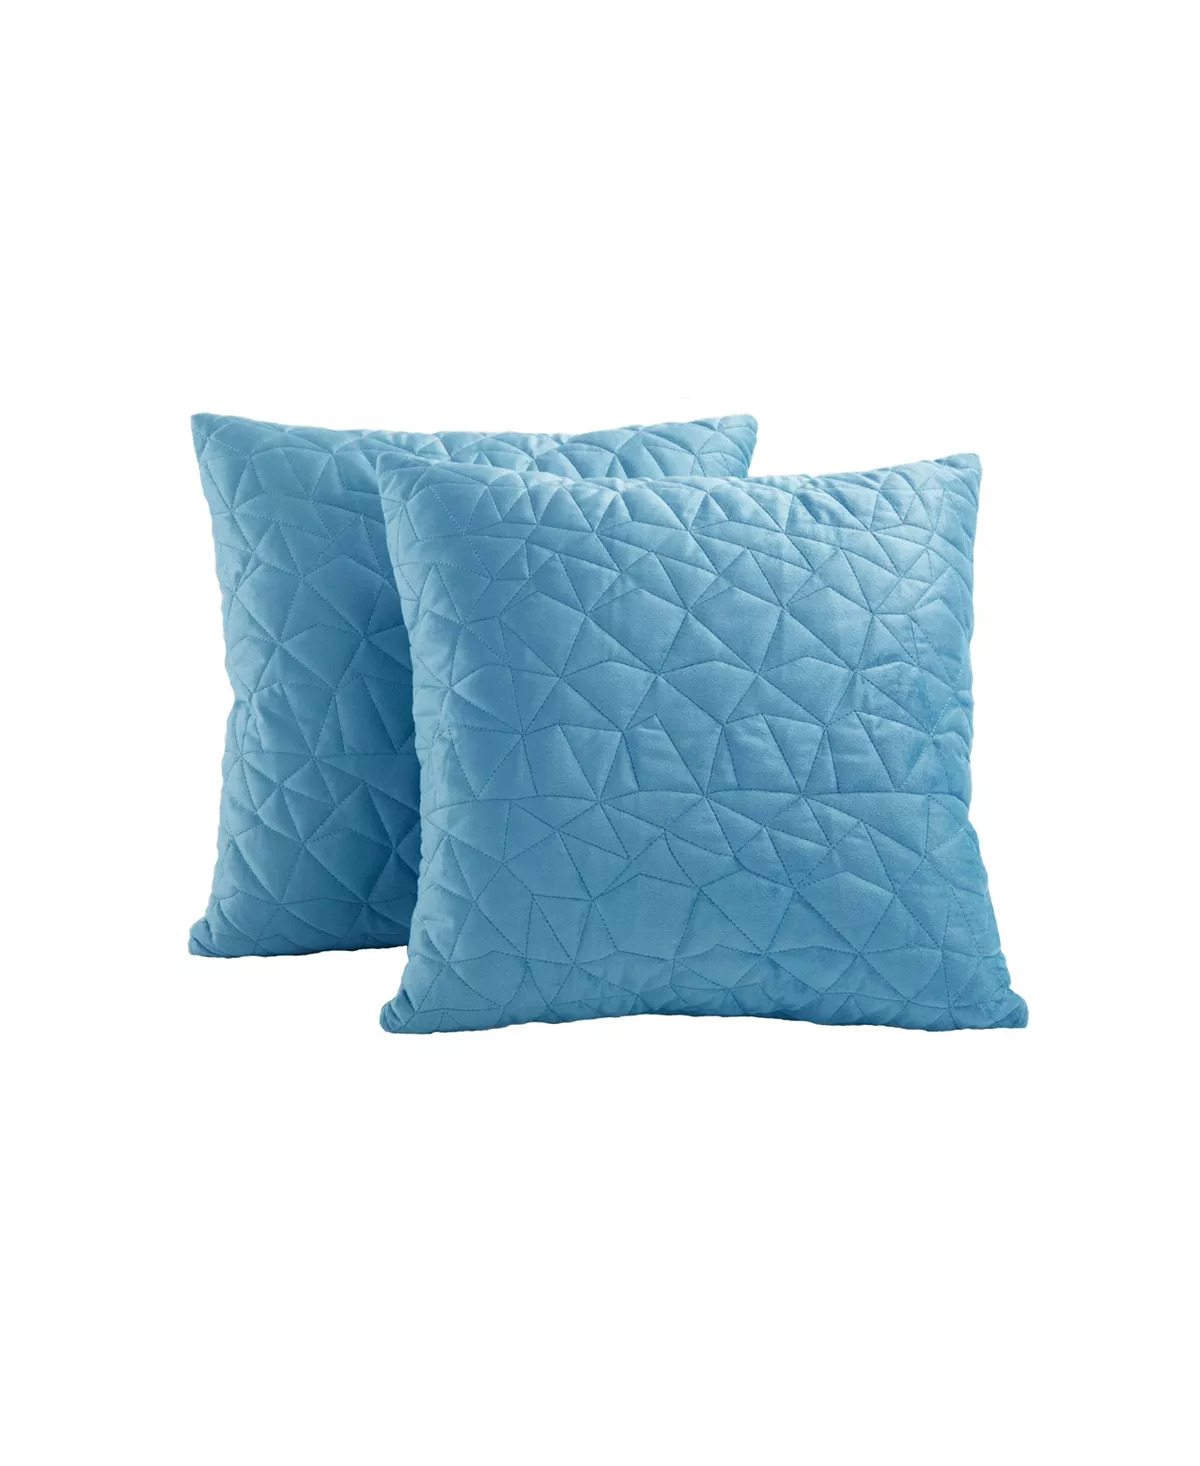 2-Pack Lush Decor 18"x18" Quilted Decorative Pillow (Navy, Green, Pink) $11.93 + Free Store Pickup at Macy's or F/S on Orders $25+